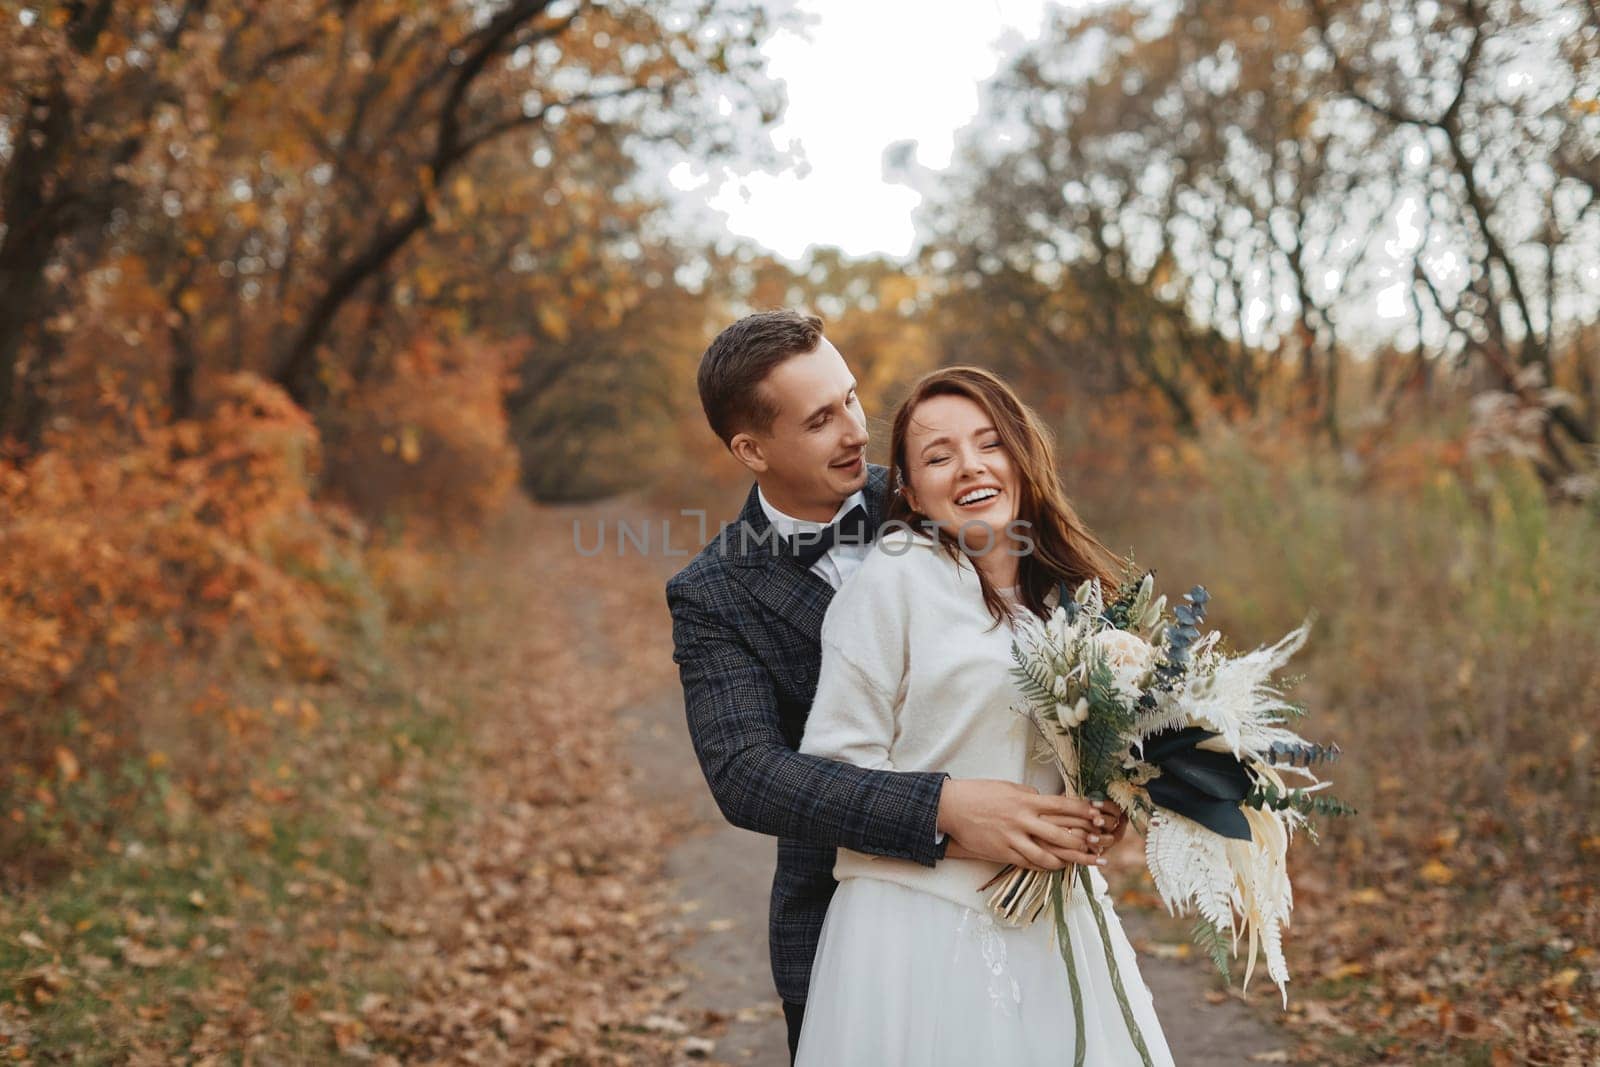 happy bride and groom enjoying romantic moments outside in autumn